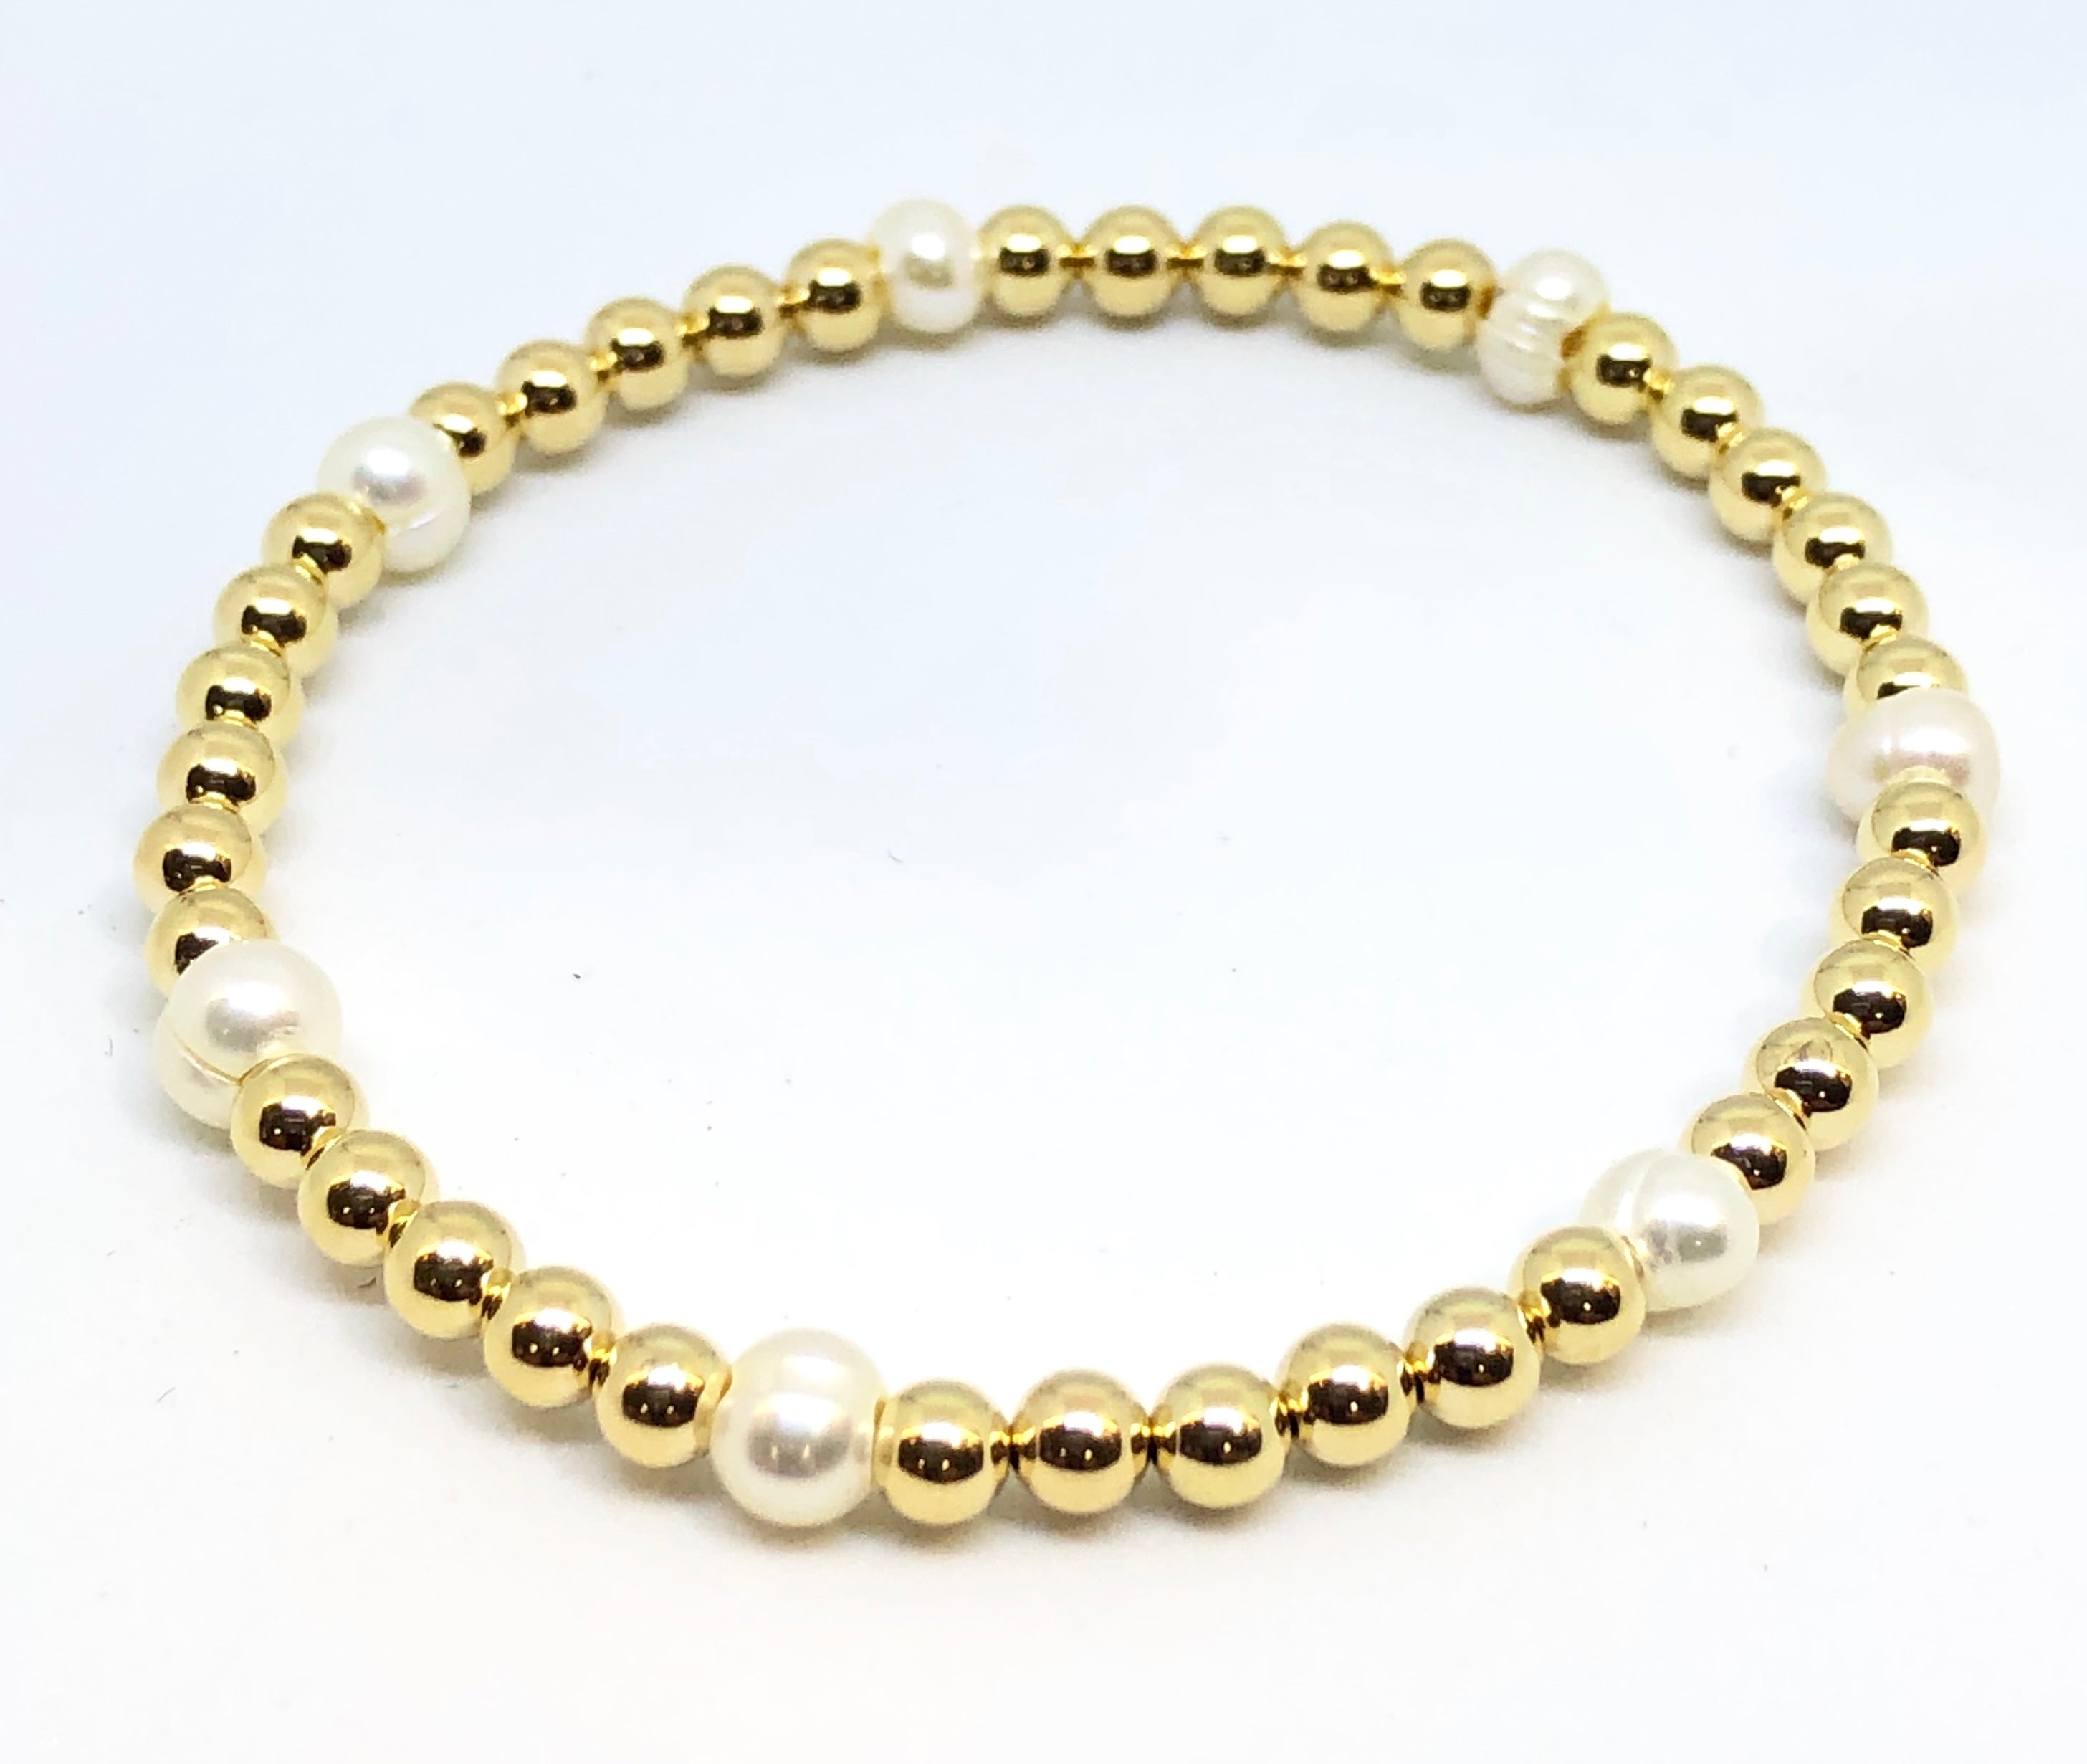 4mm 14kt Gold Filled Bead Bracelet with 7 4mm Fresh Water Pearls